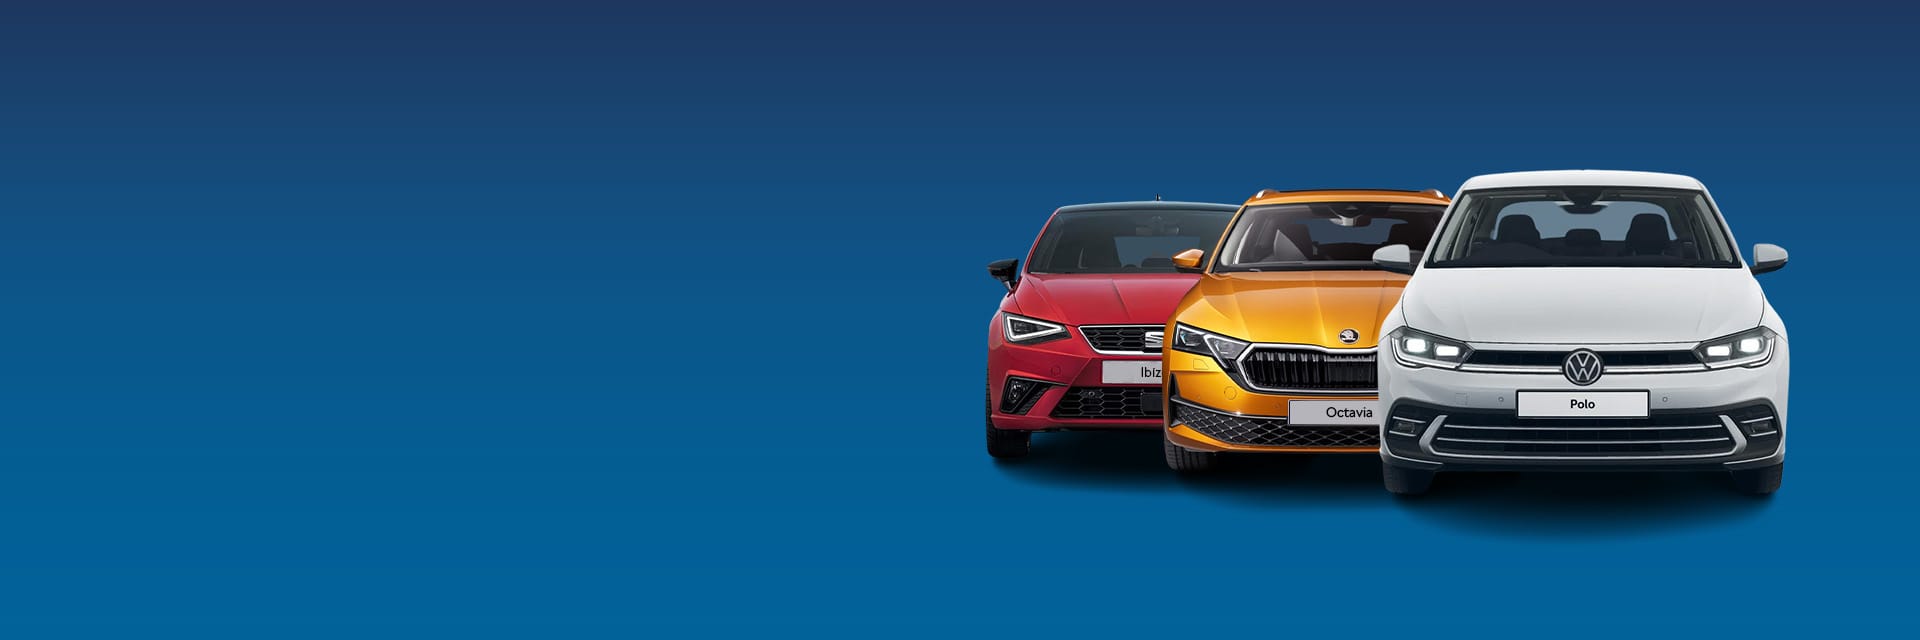 Pulman used car website banner with car illustrations.